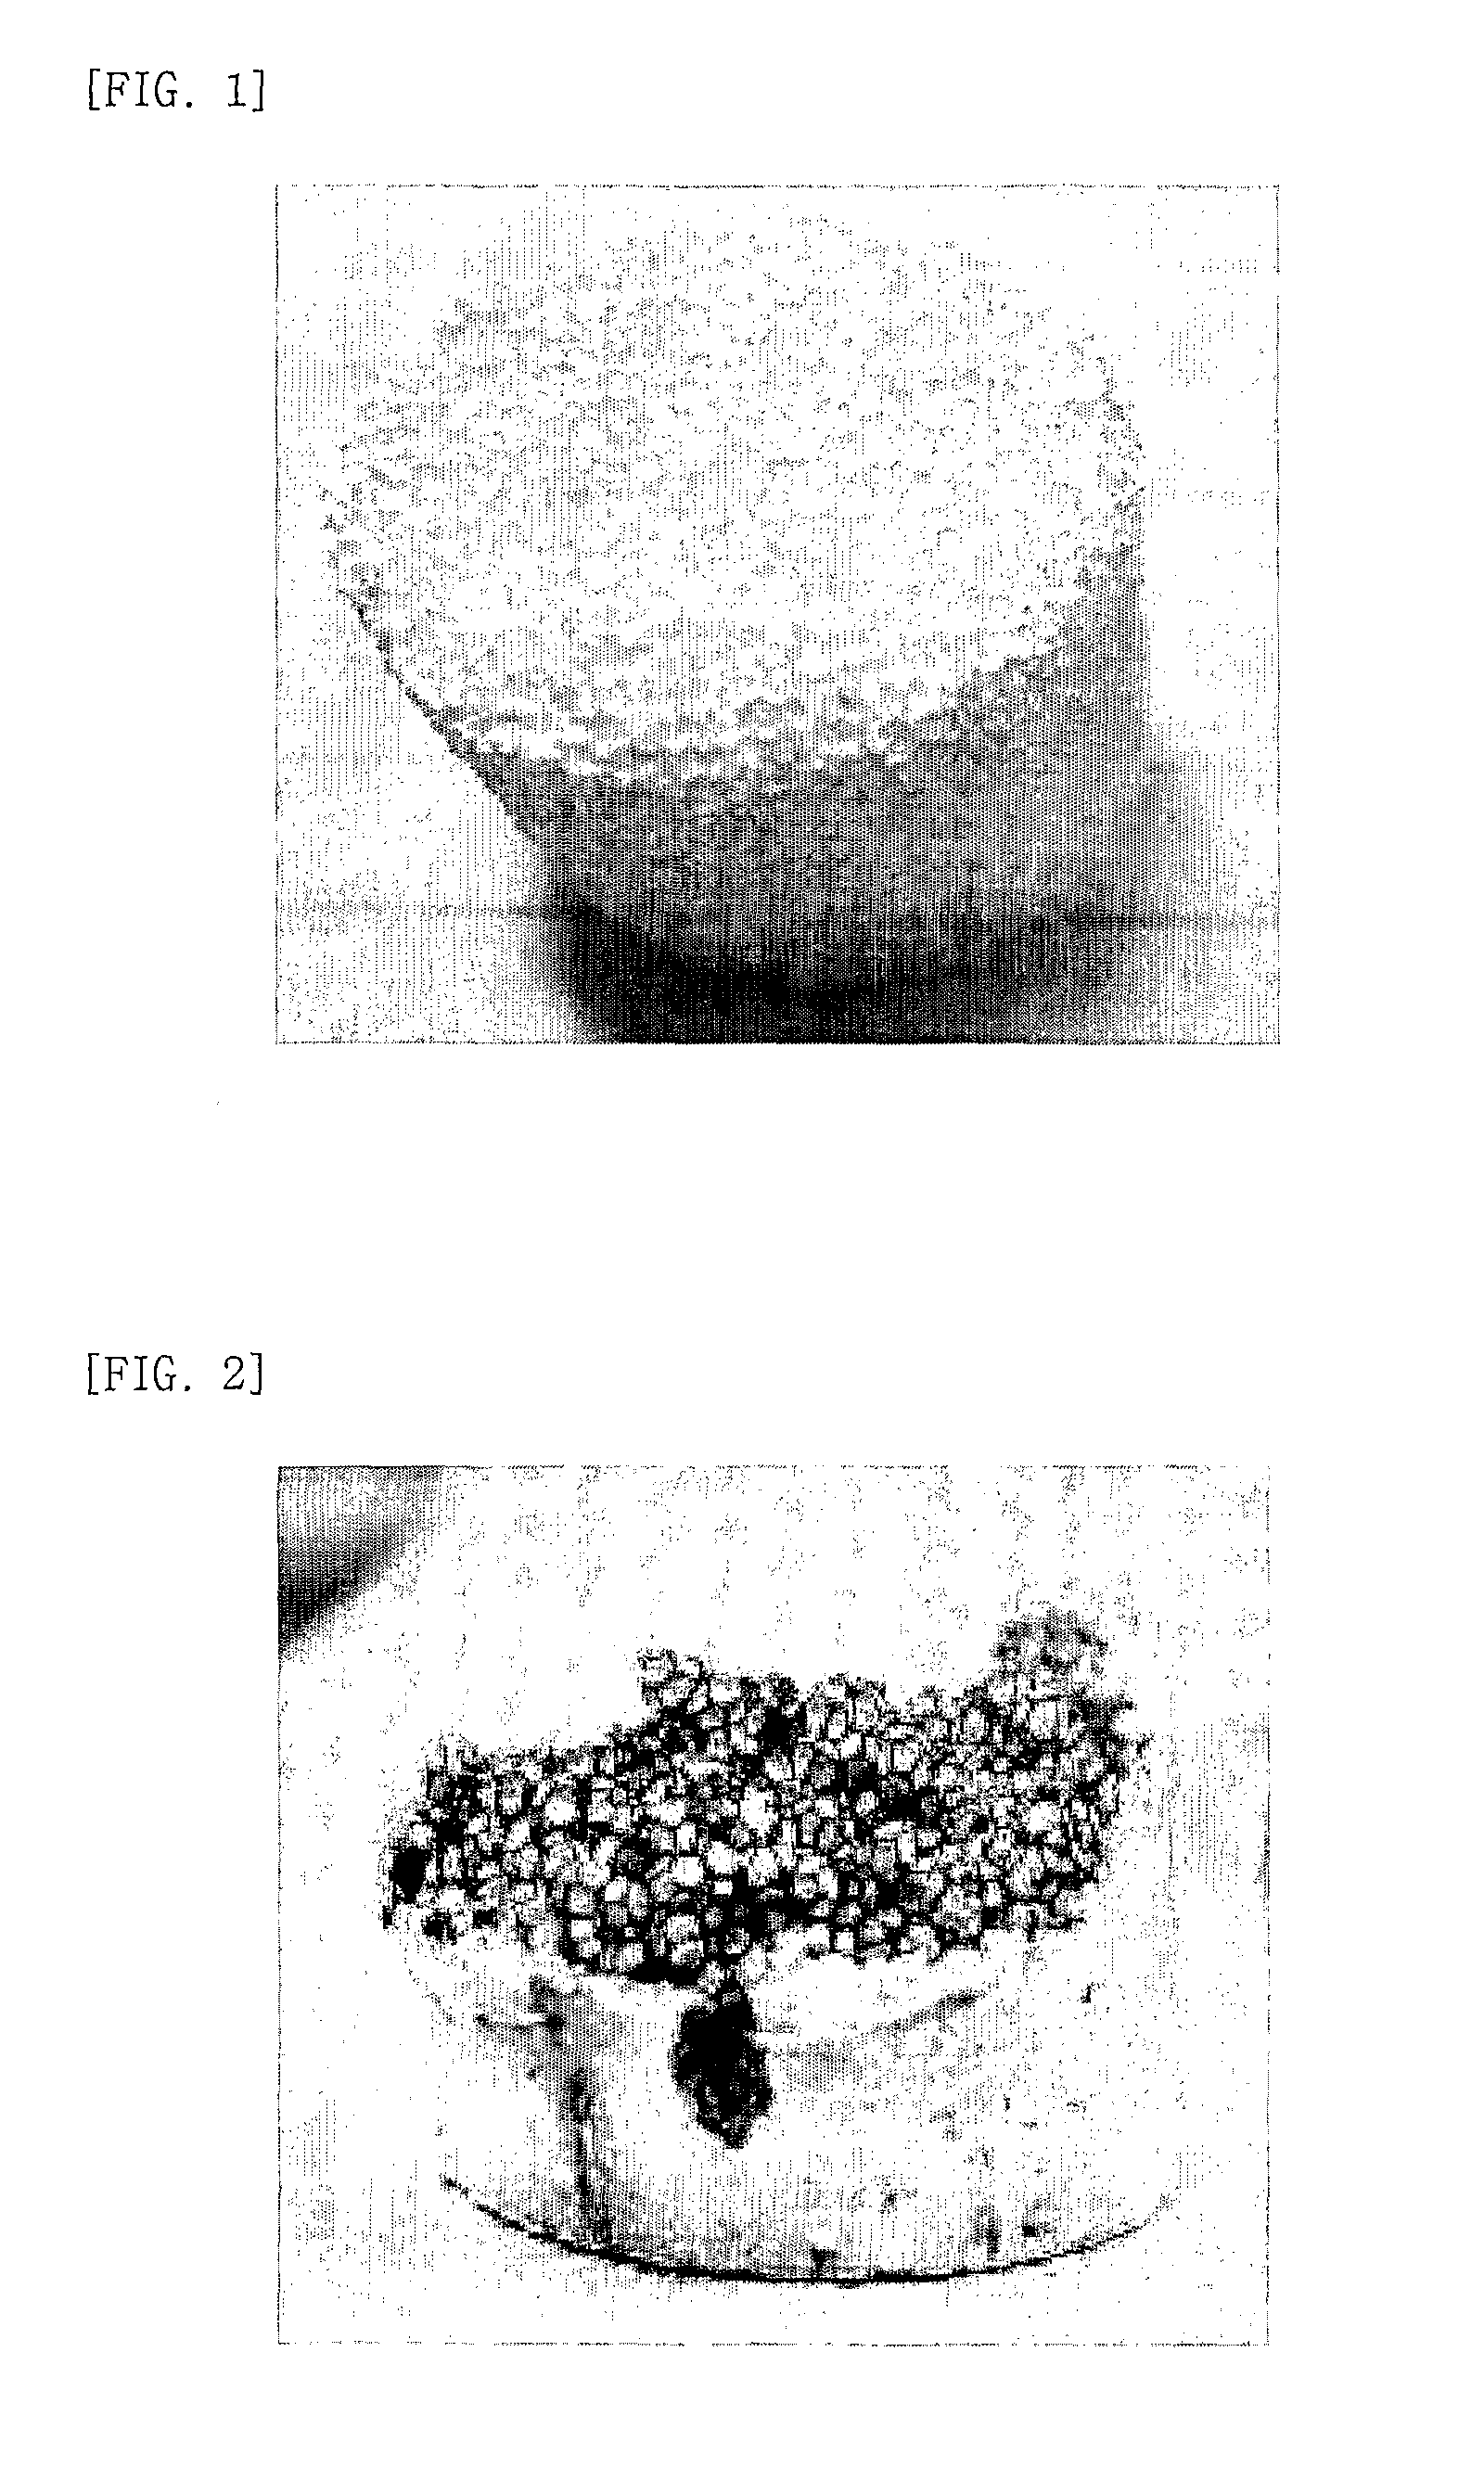 Composite implant having porous structure filled with biodegradable alloy and method of magnesium-based manufacturing the same